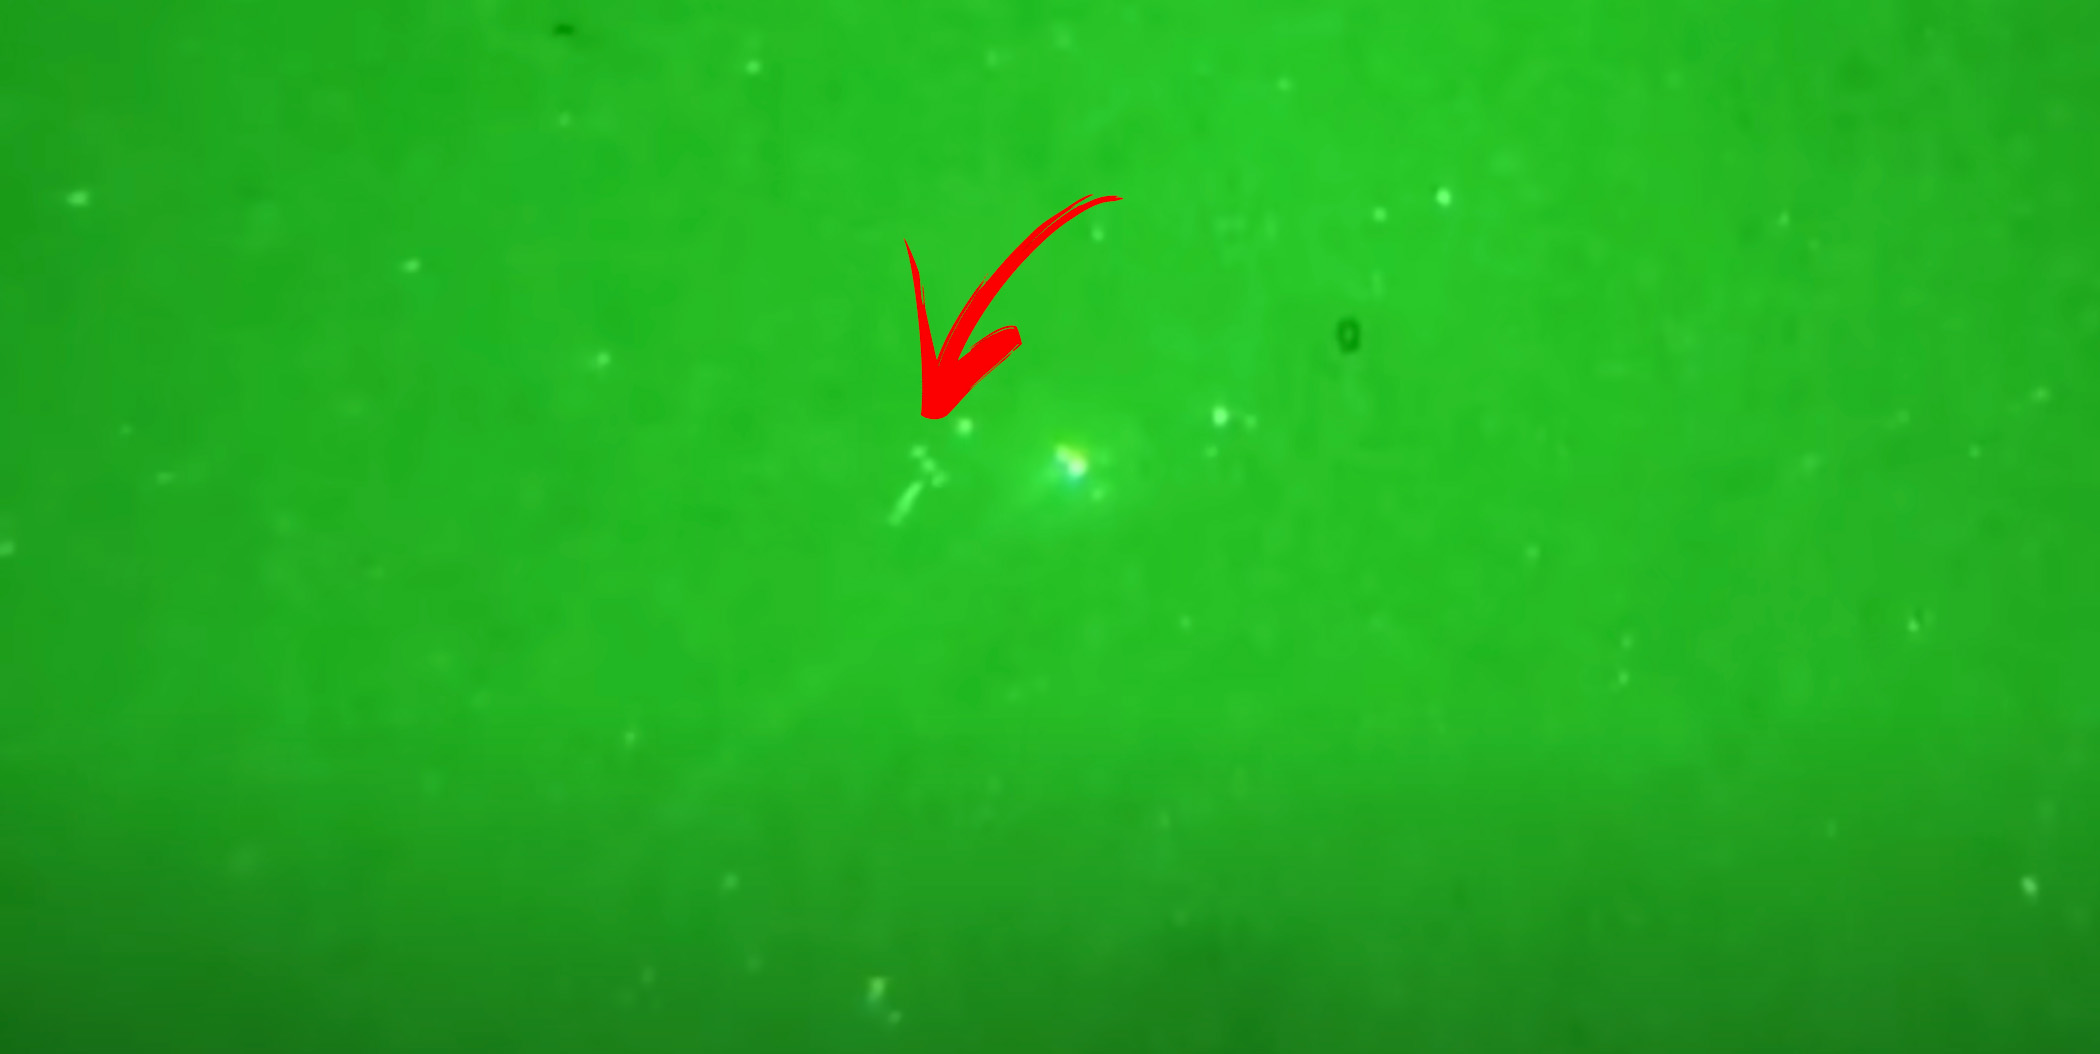 A screenshot with annotations showing the t-shaped UFO. YouTube.